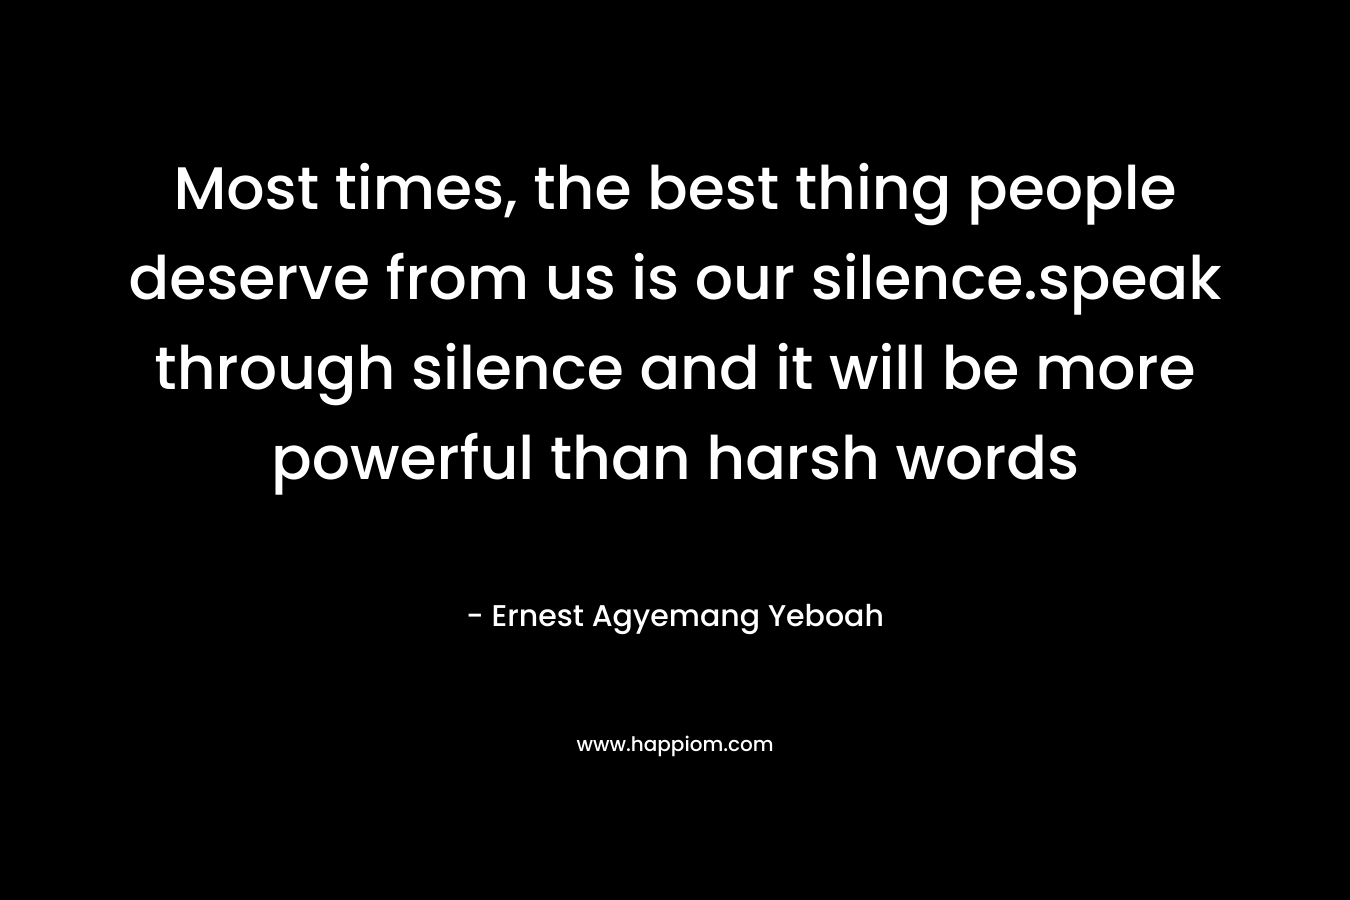 Most times, the best thing people deserve from us is our silence.speak through silence and it will be more powerful than harsh words – Ernest Agyemang Yeboah